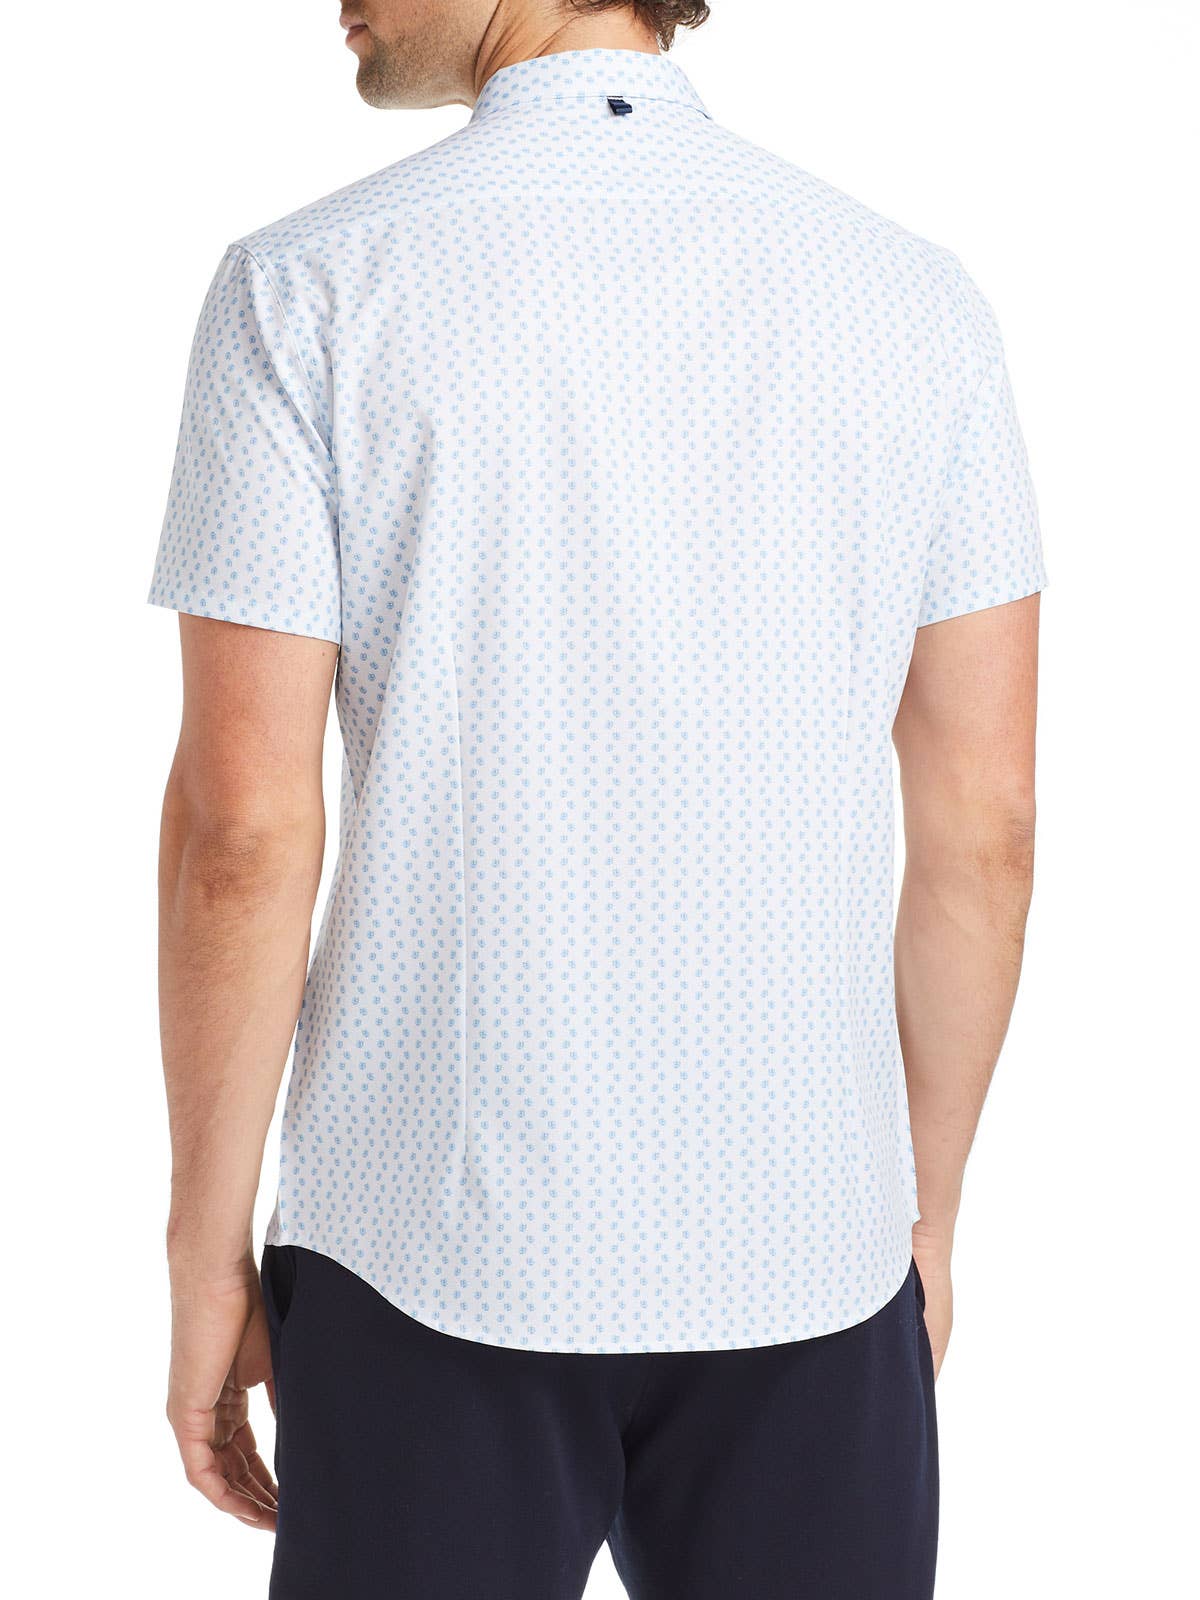 Texted Dot 4 Way Stretch Short Sleeve Shirt by W.R.K.